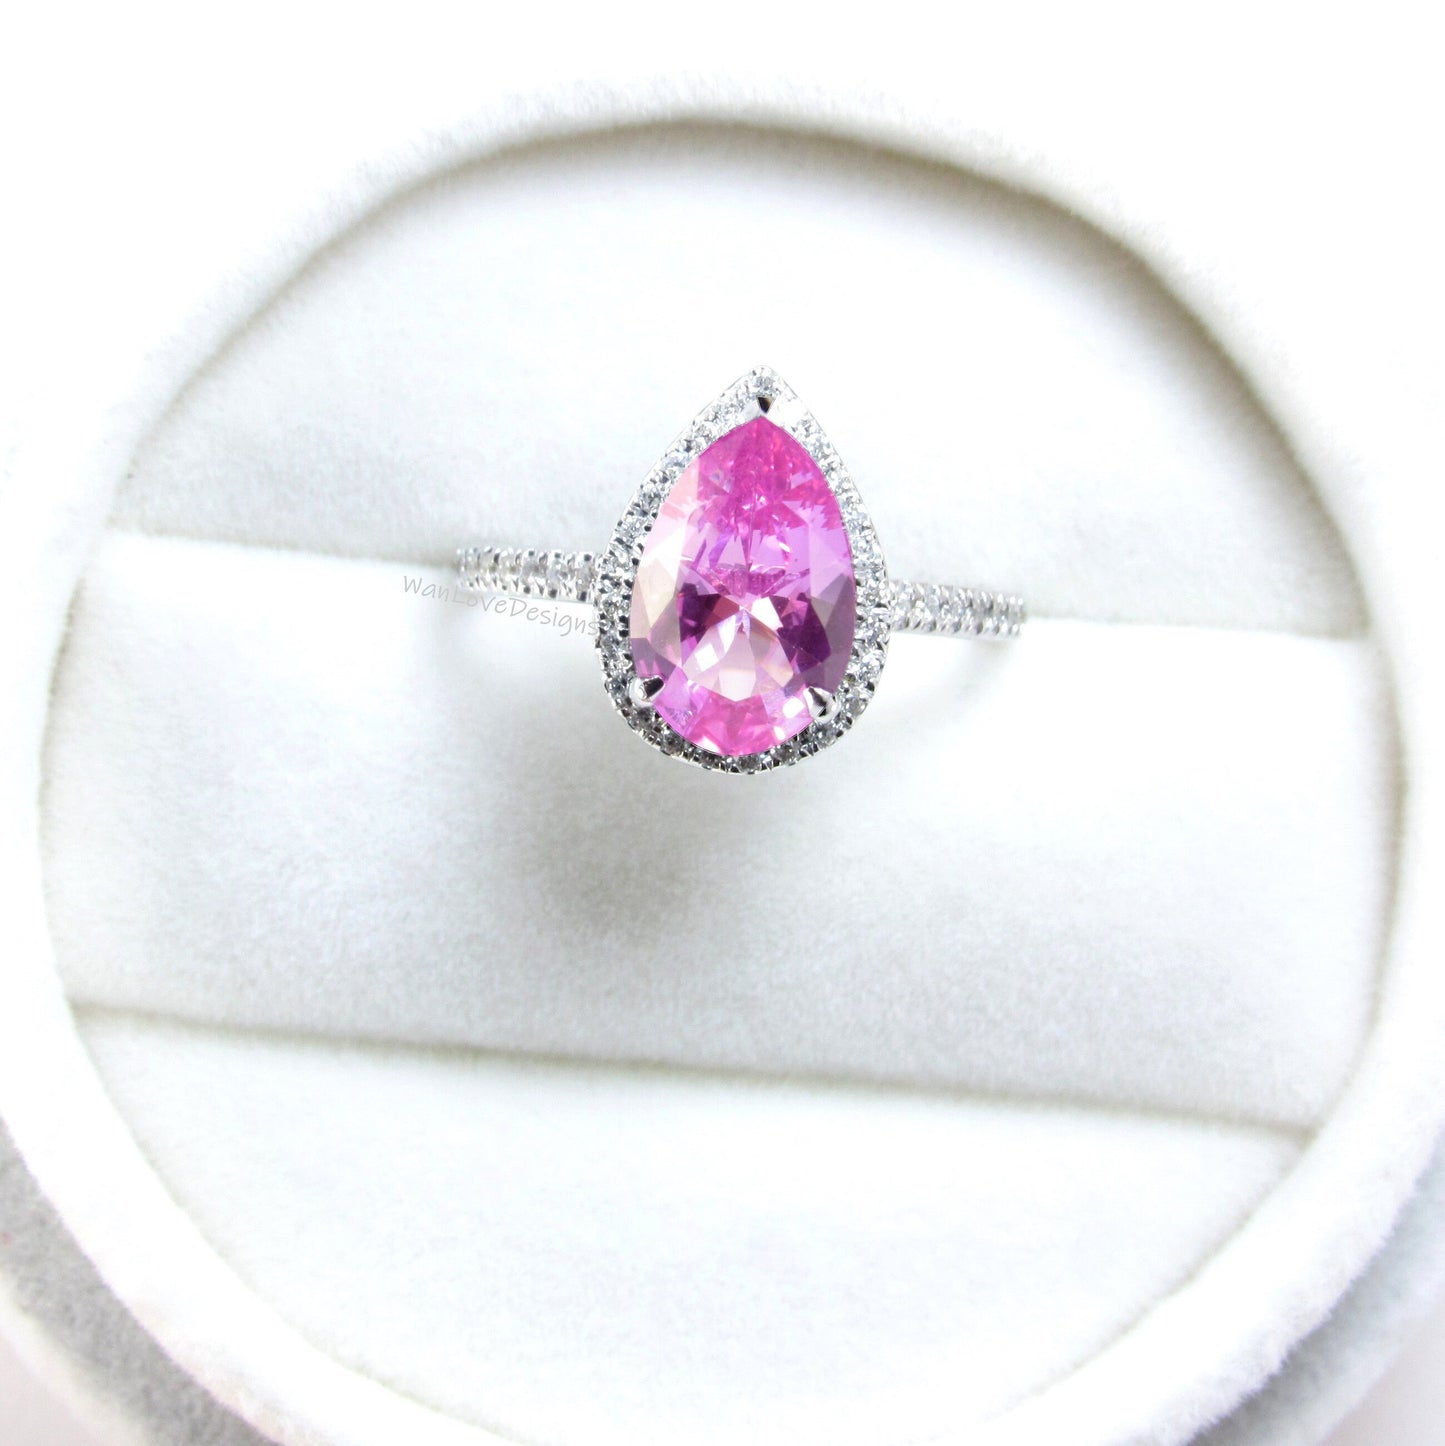 Vintage Pear shaped Pink Sapphire Engagement Ring, Pear Cut 14k Rose Gold Diamond Halo Ring, Wedding Ring Anniversary Ring Proposal Ring.